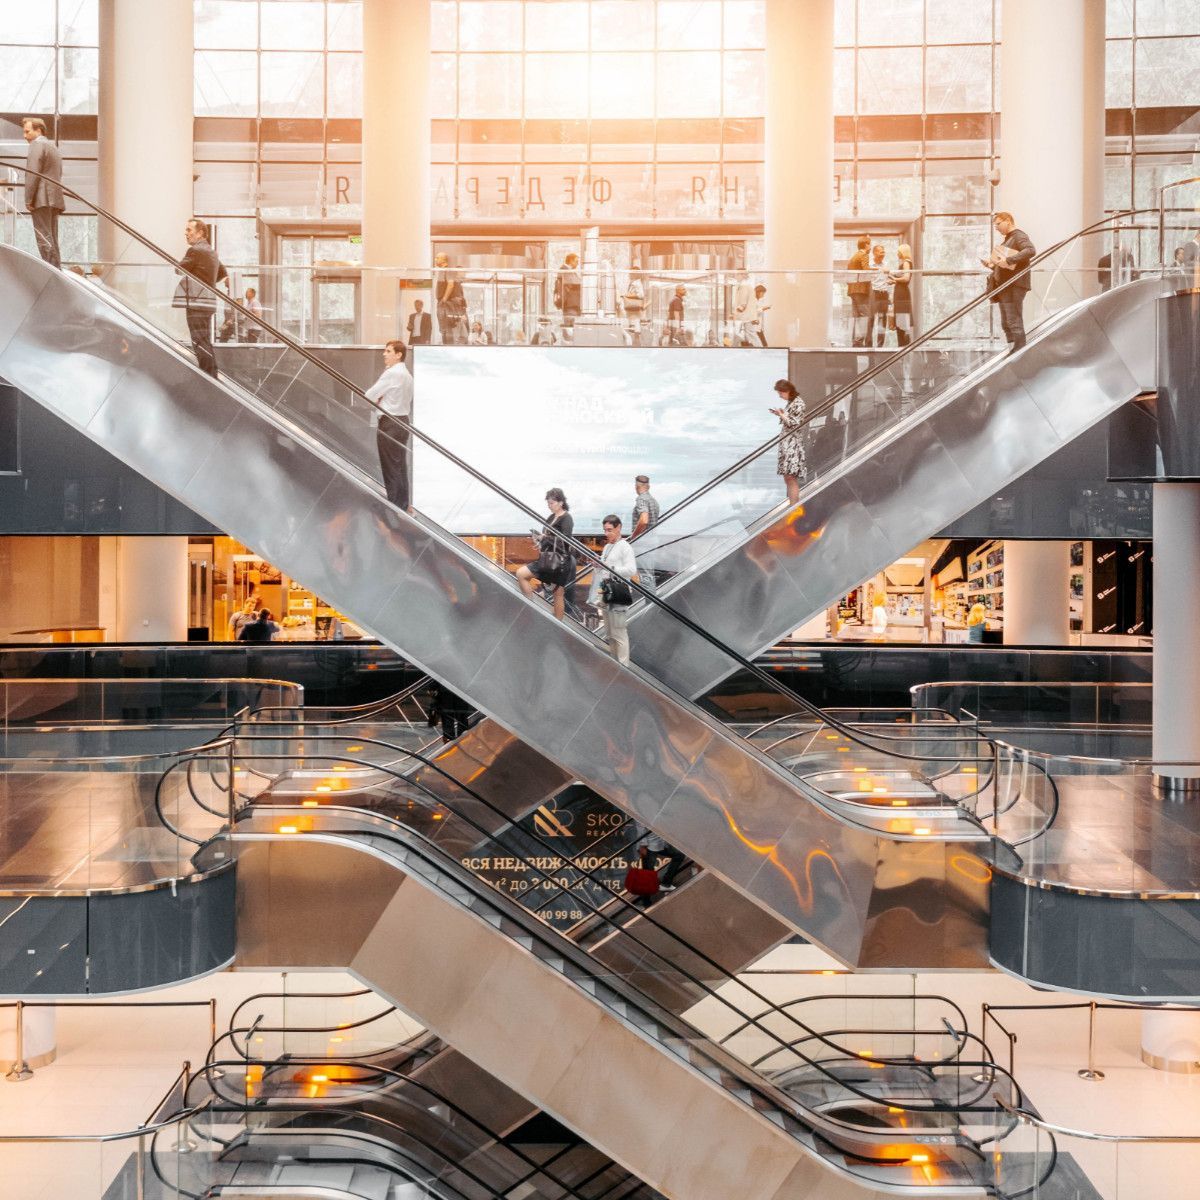 a group of people are riding escalators in a shopping mall .